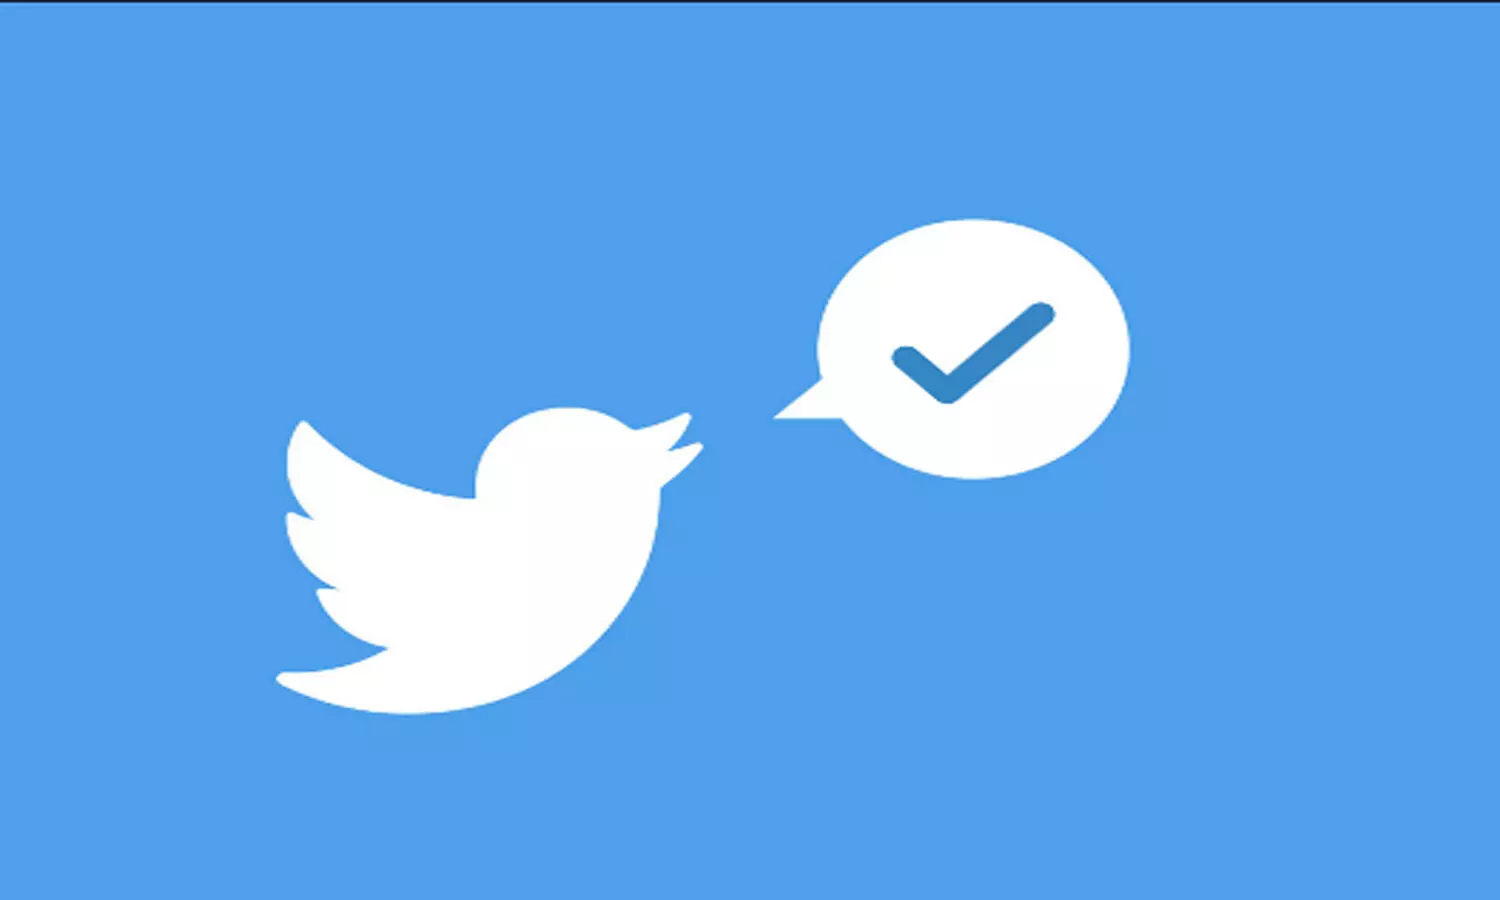 Twitter is going to change the color of its Buttons